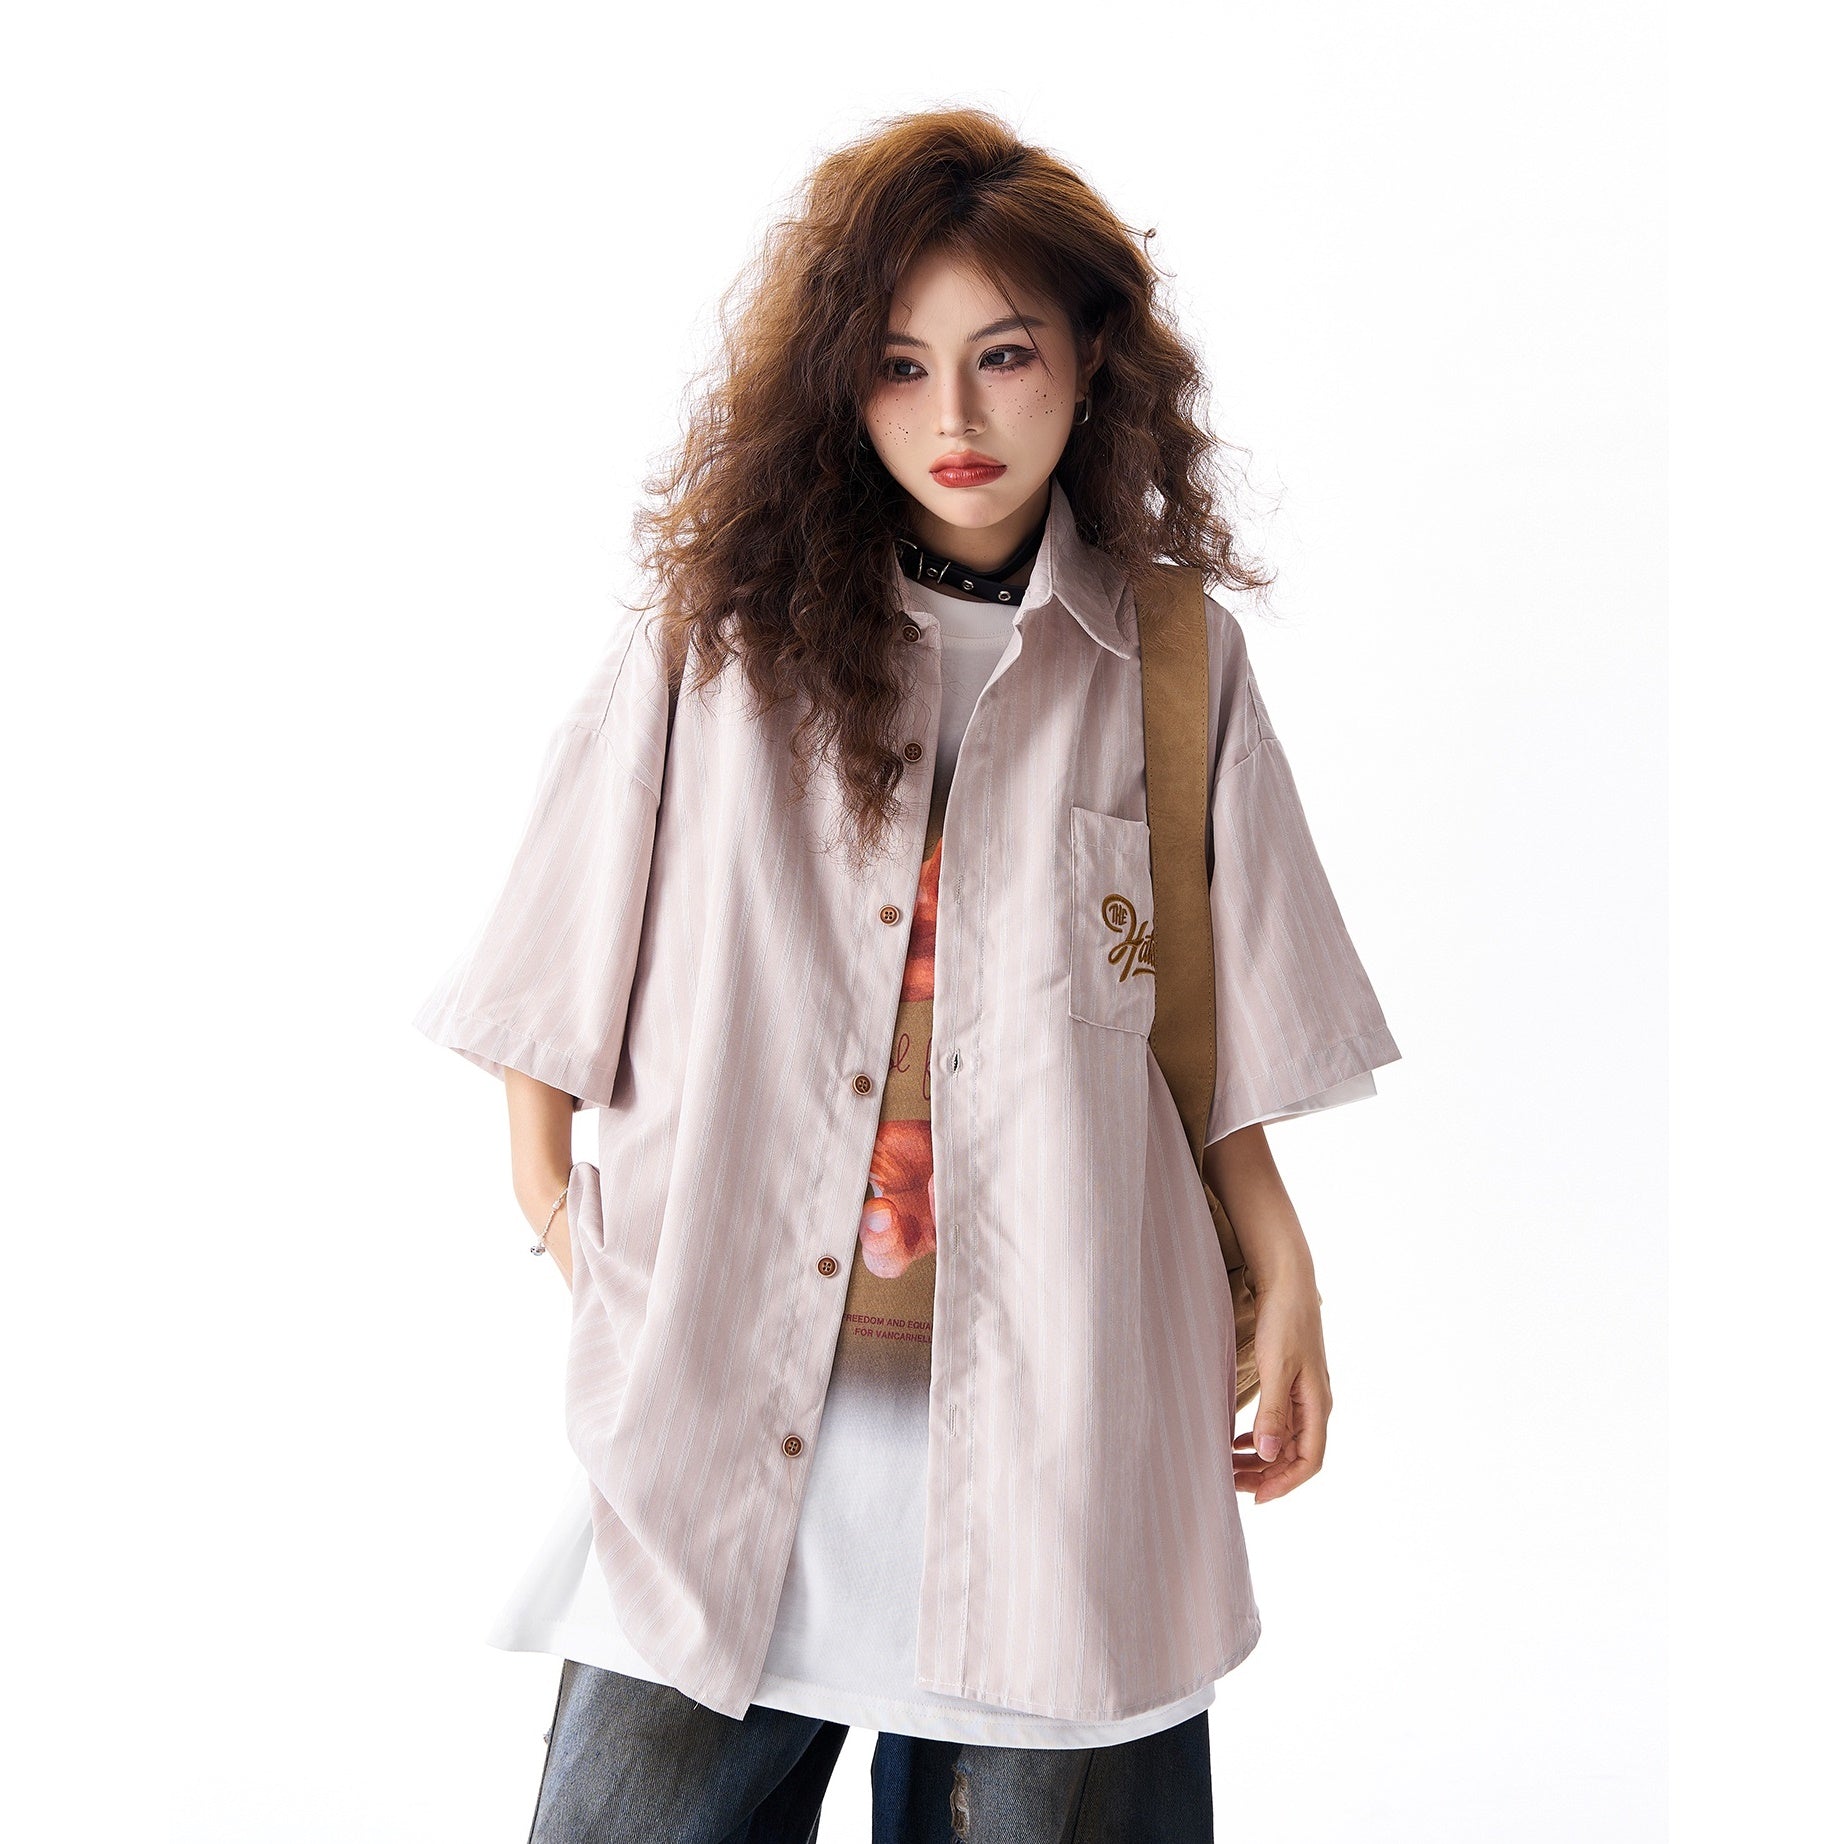 Embroidery Striped Short Sleeve Loose Shirt HG7163